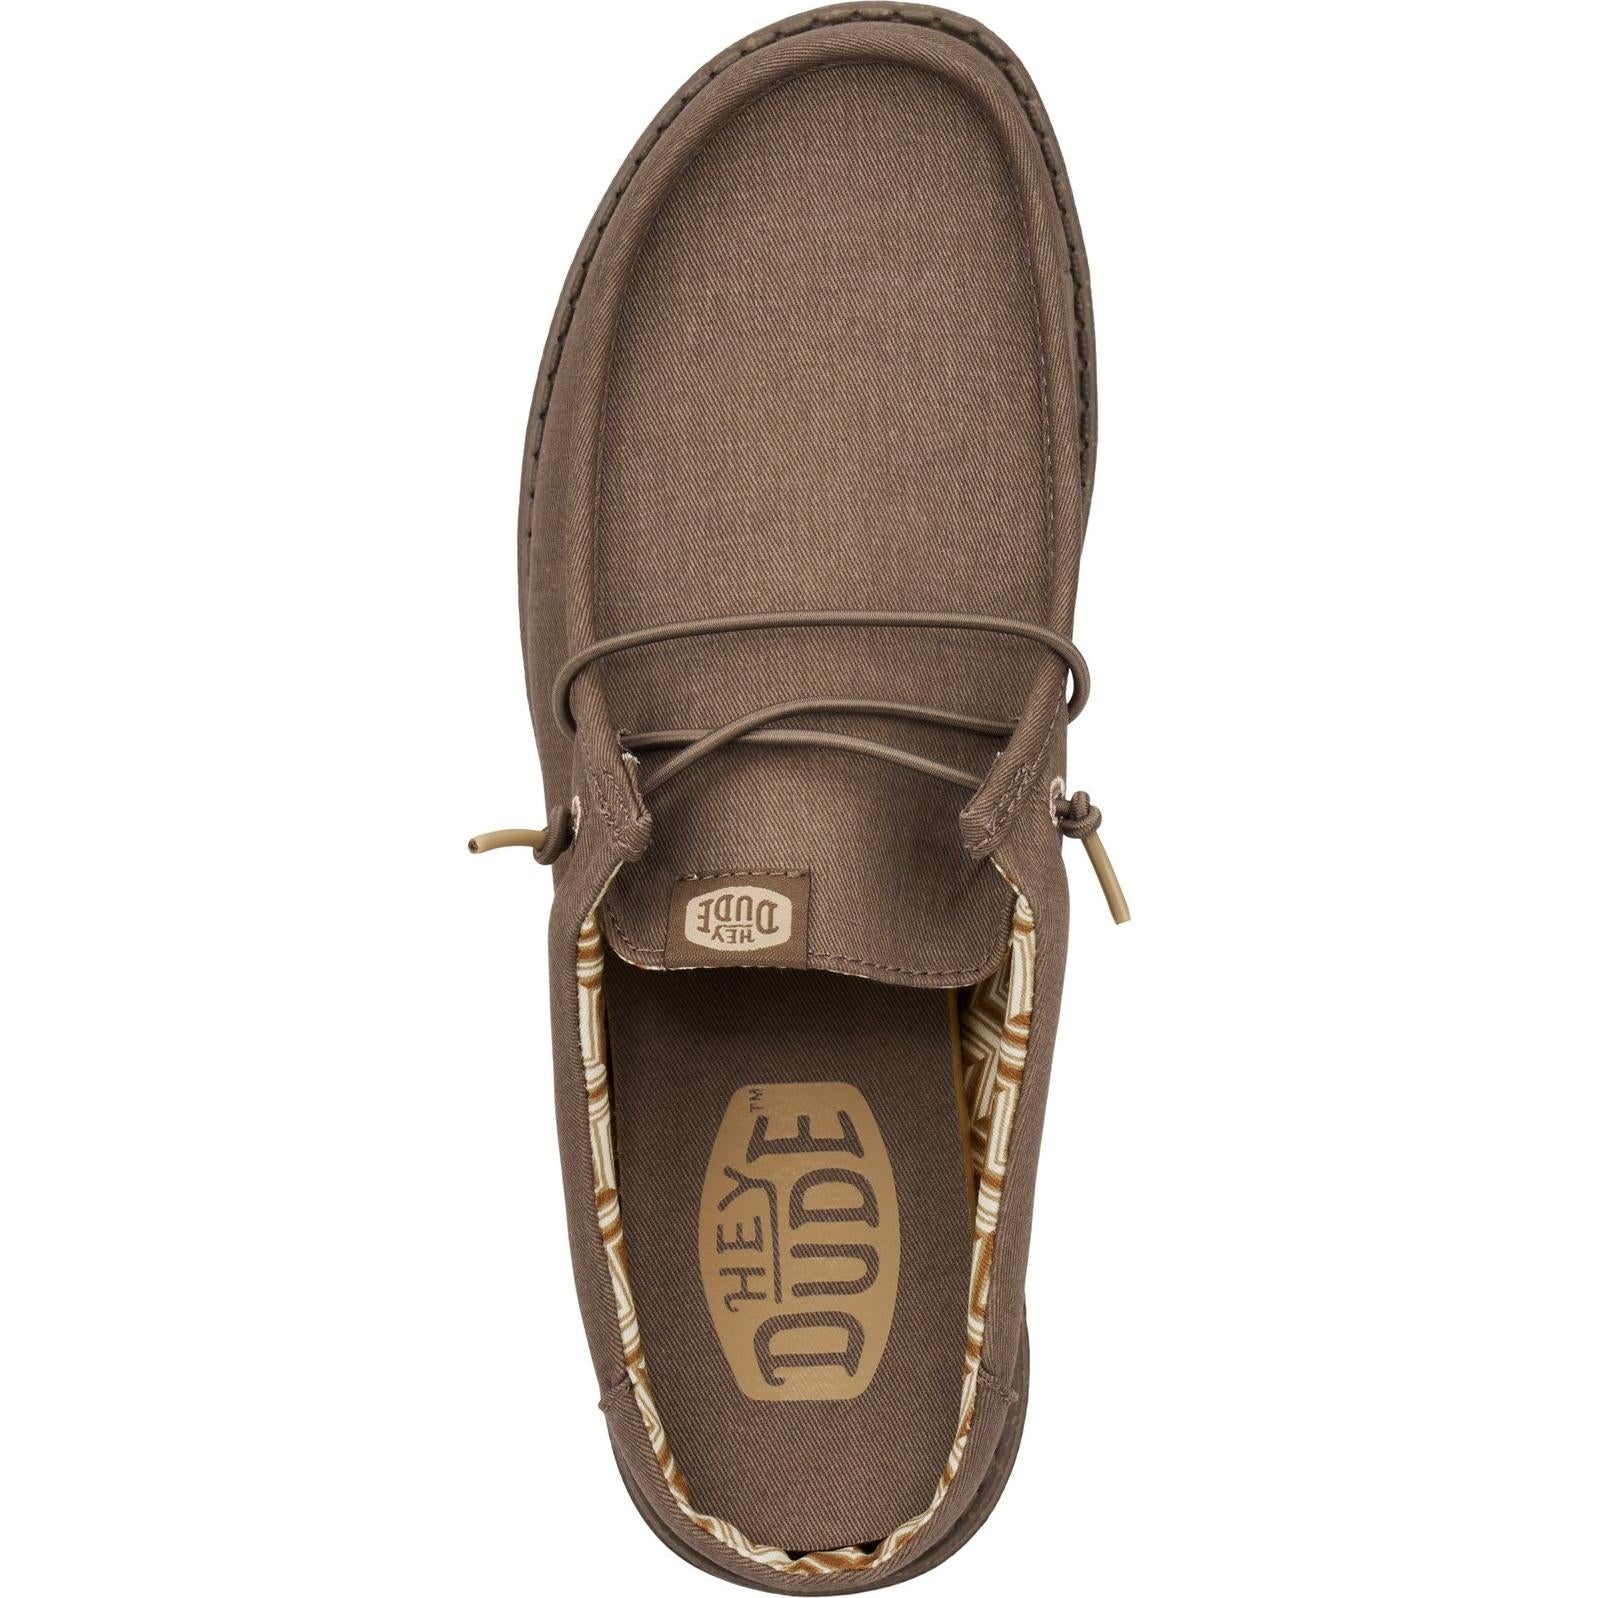 Hey Dude Wally Slip Canvas Mule Shoes